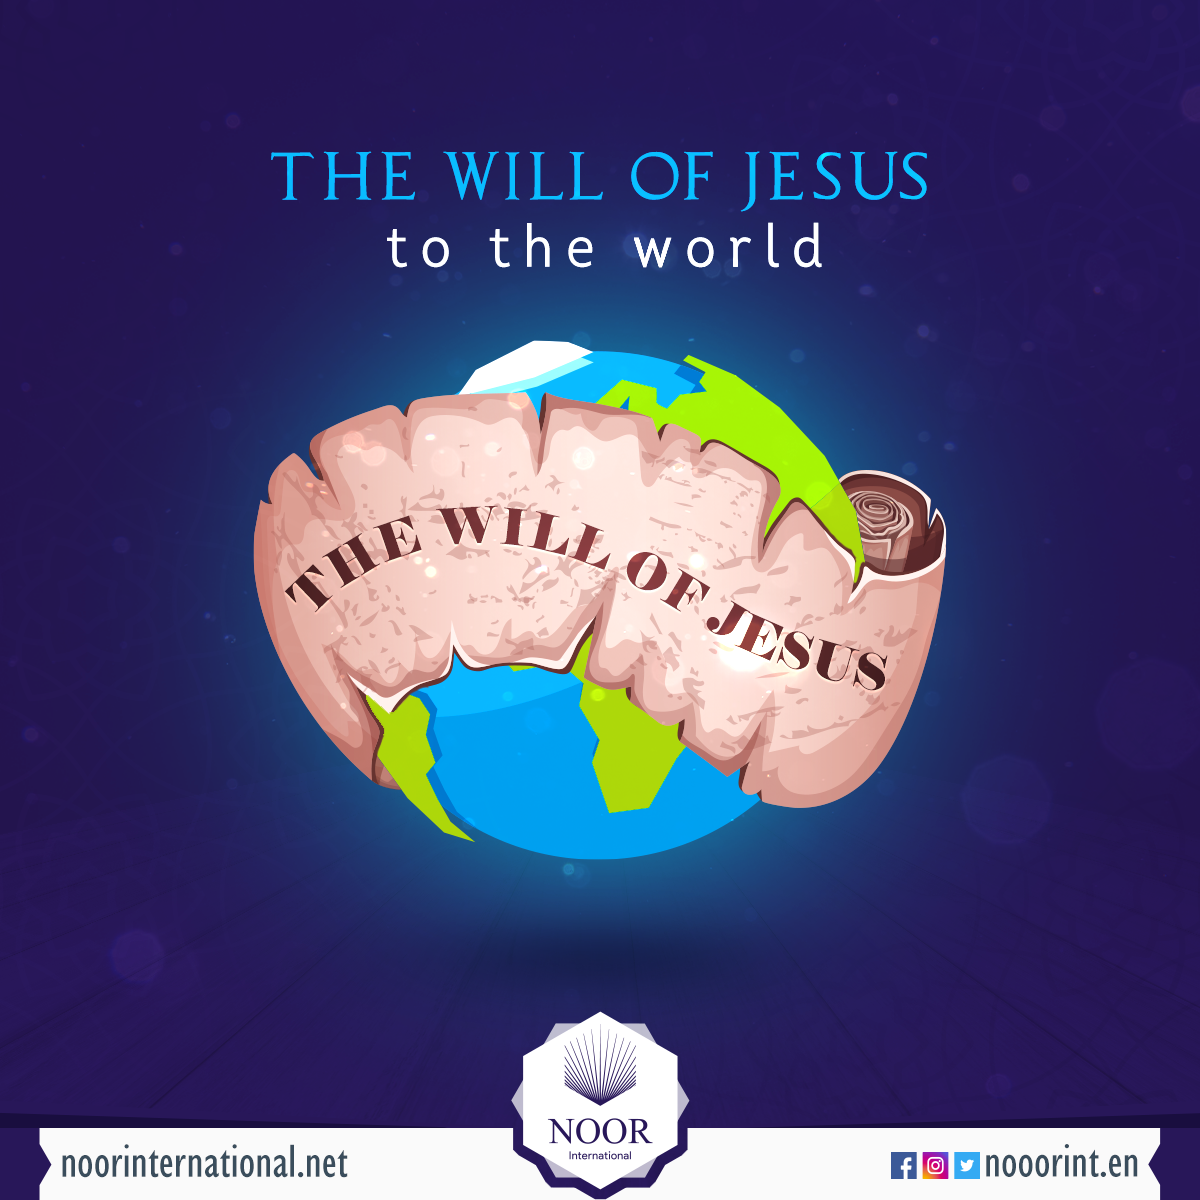 The will of Jesus to the world